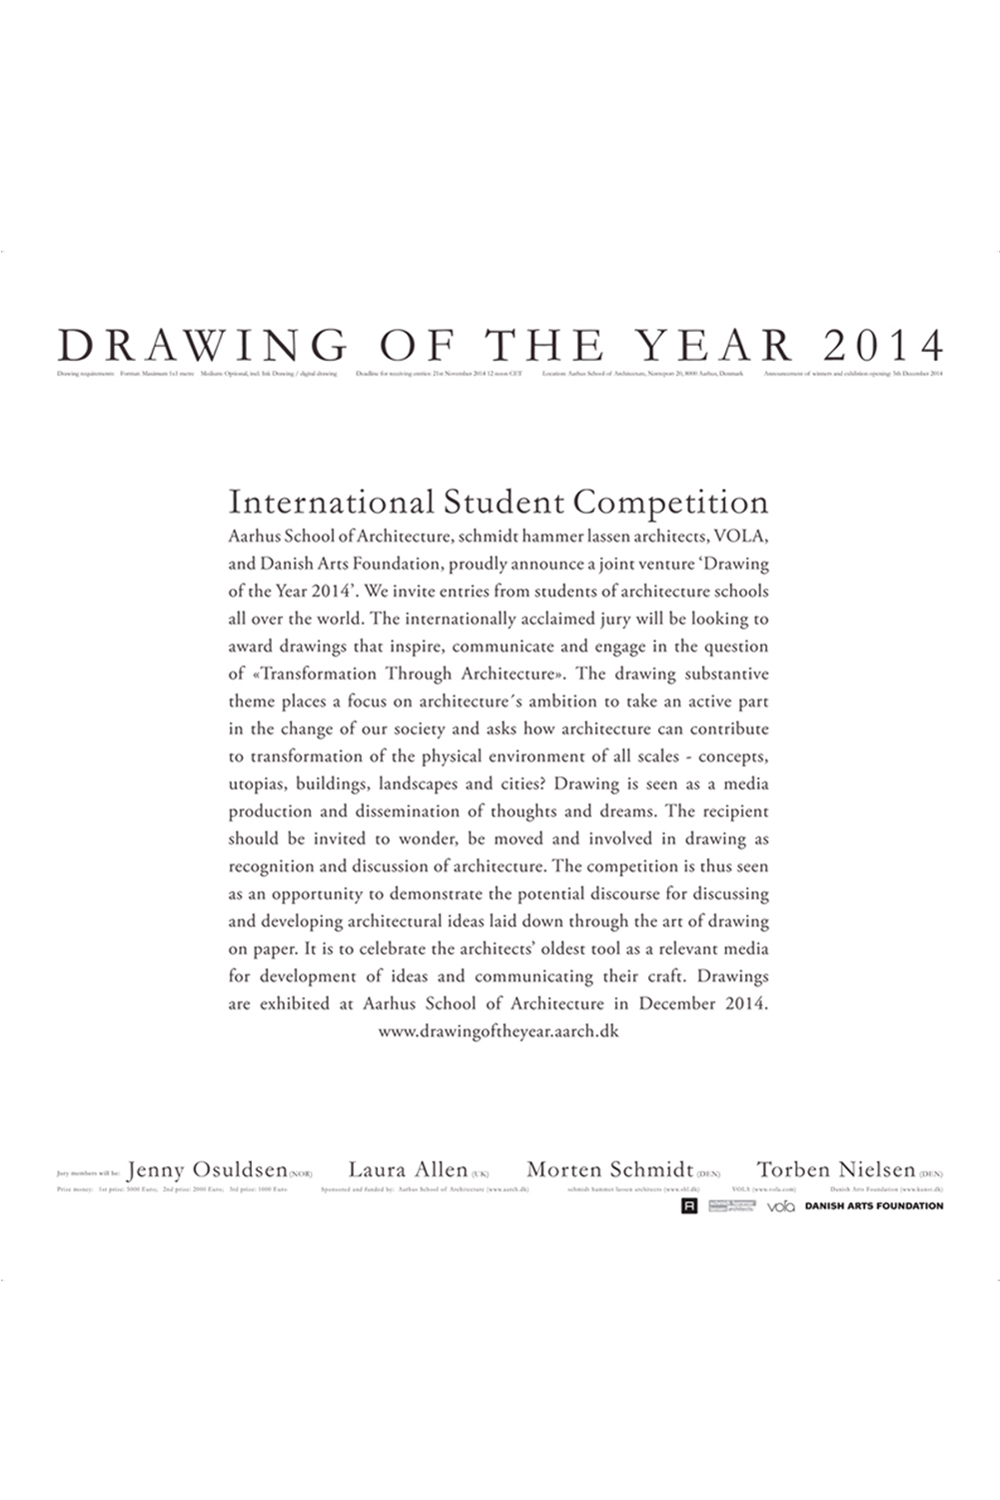 “Drawing of the year 2014” 